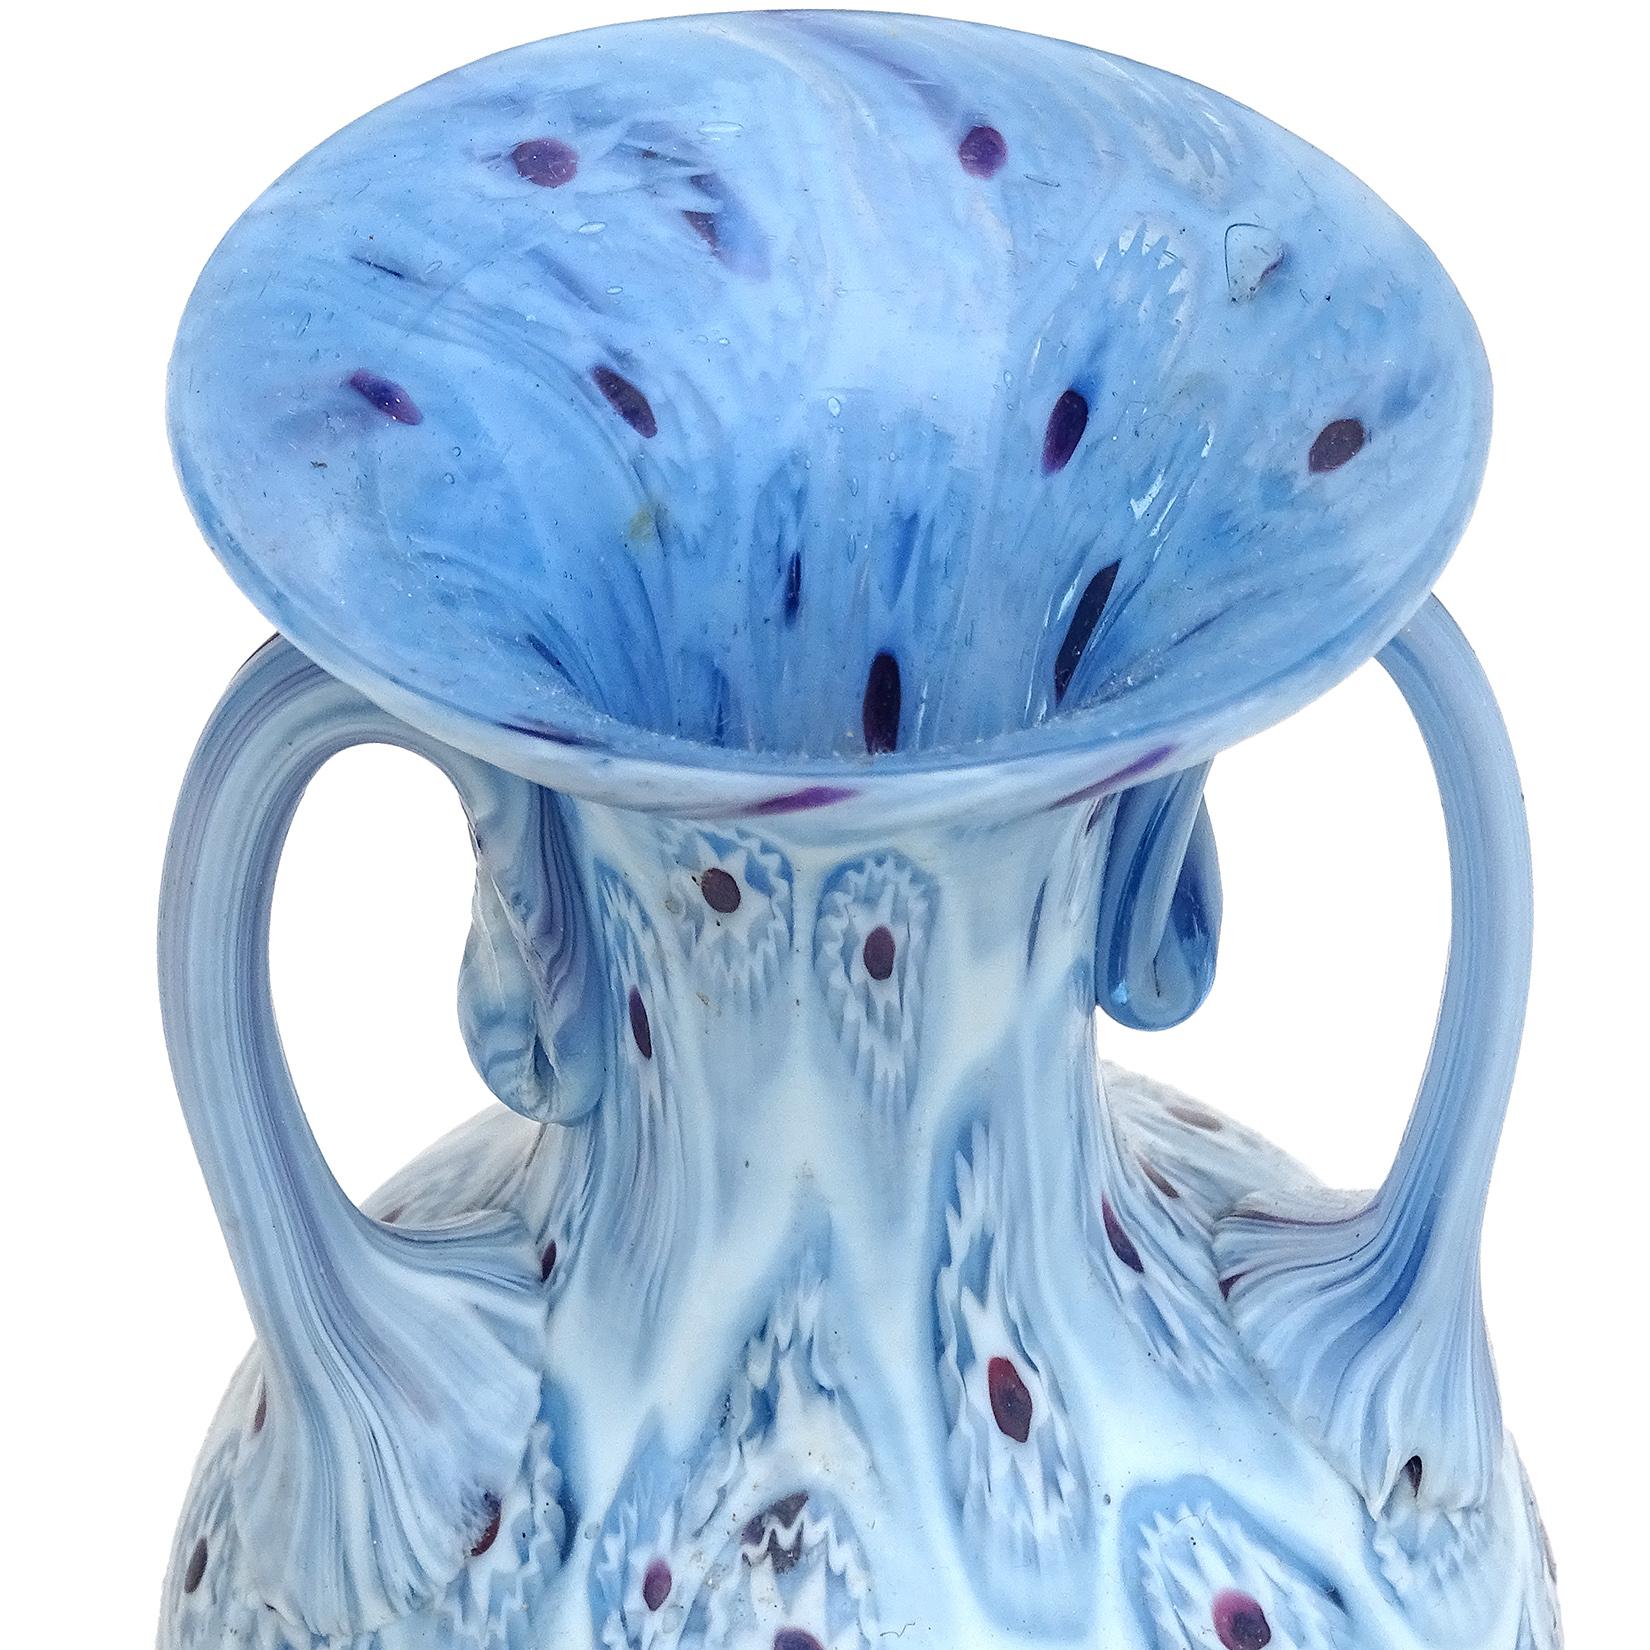 Beautiful antique Murano hand blown millefiori mosaic Italian art glass decorative cabinet vase. Documented to the Fratelli Toso Company, circa 1910-1930. The vase has a sky blue flower murine design with dark red centers, and layers of darker blue.